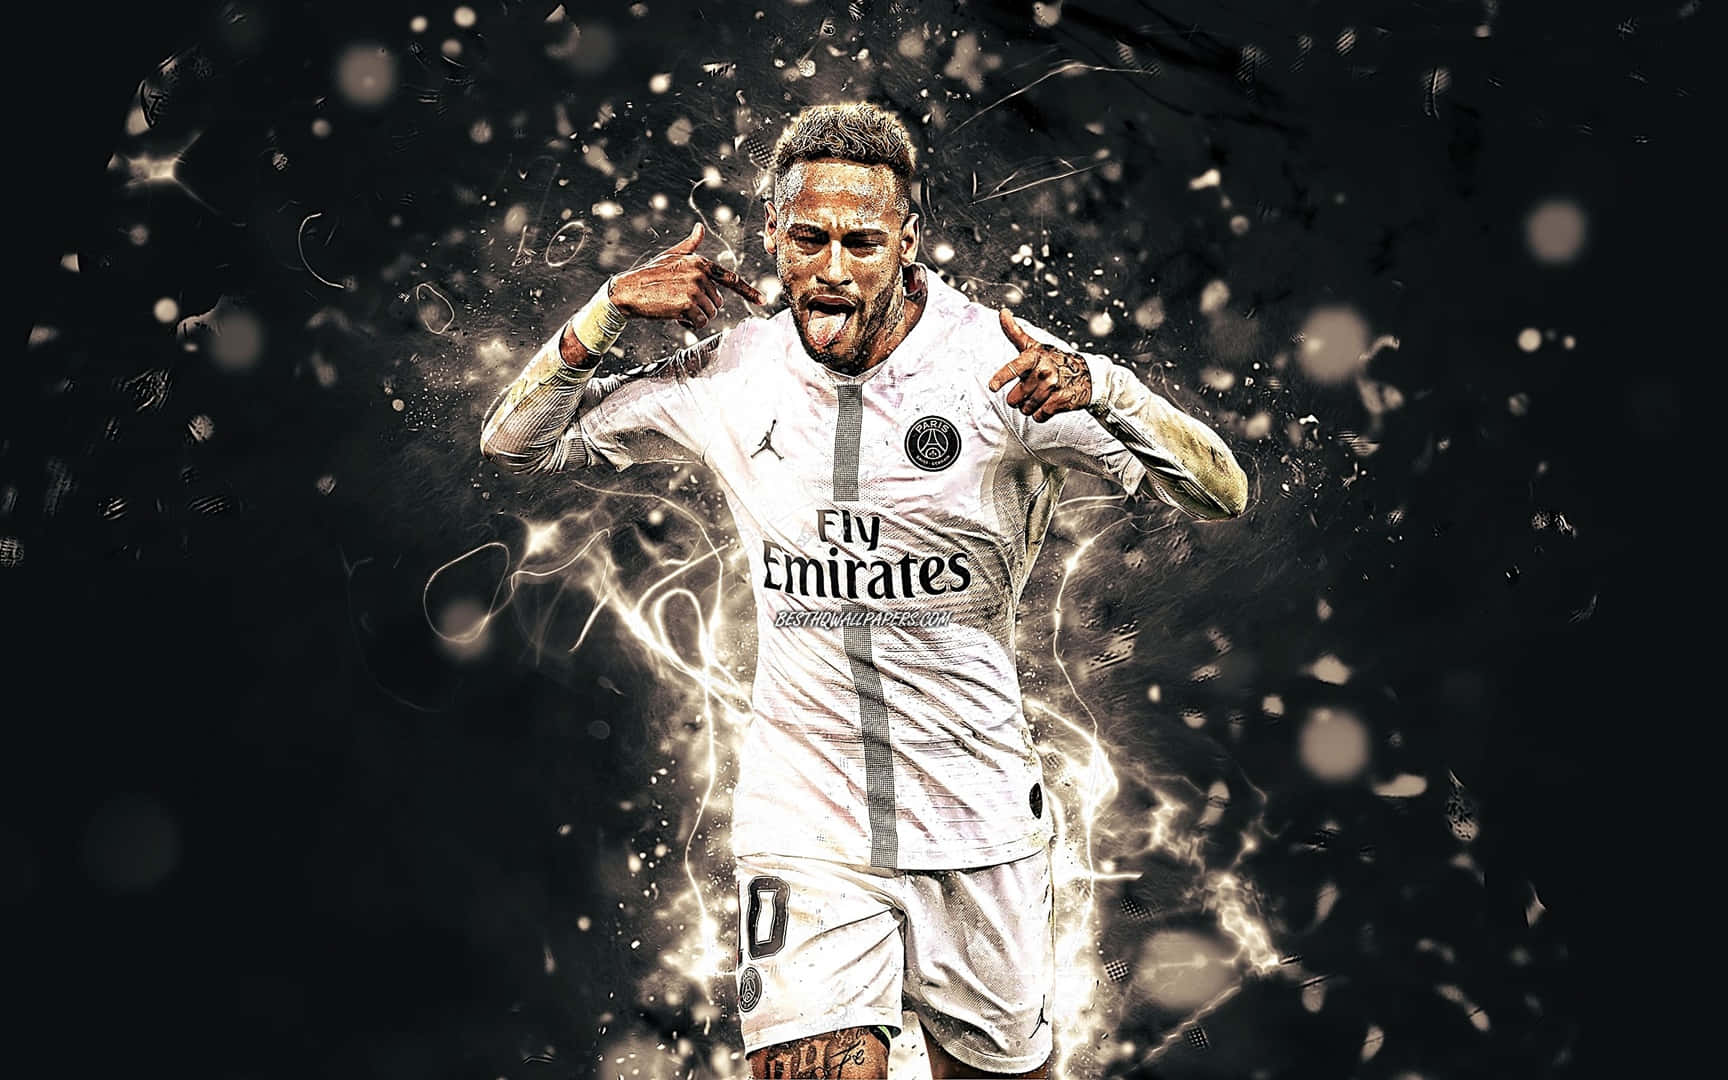 100+] Neymar Ultra Hd Wallpapers For Free | Wallpapers.Com